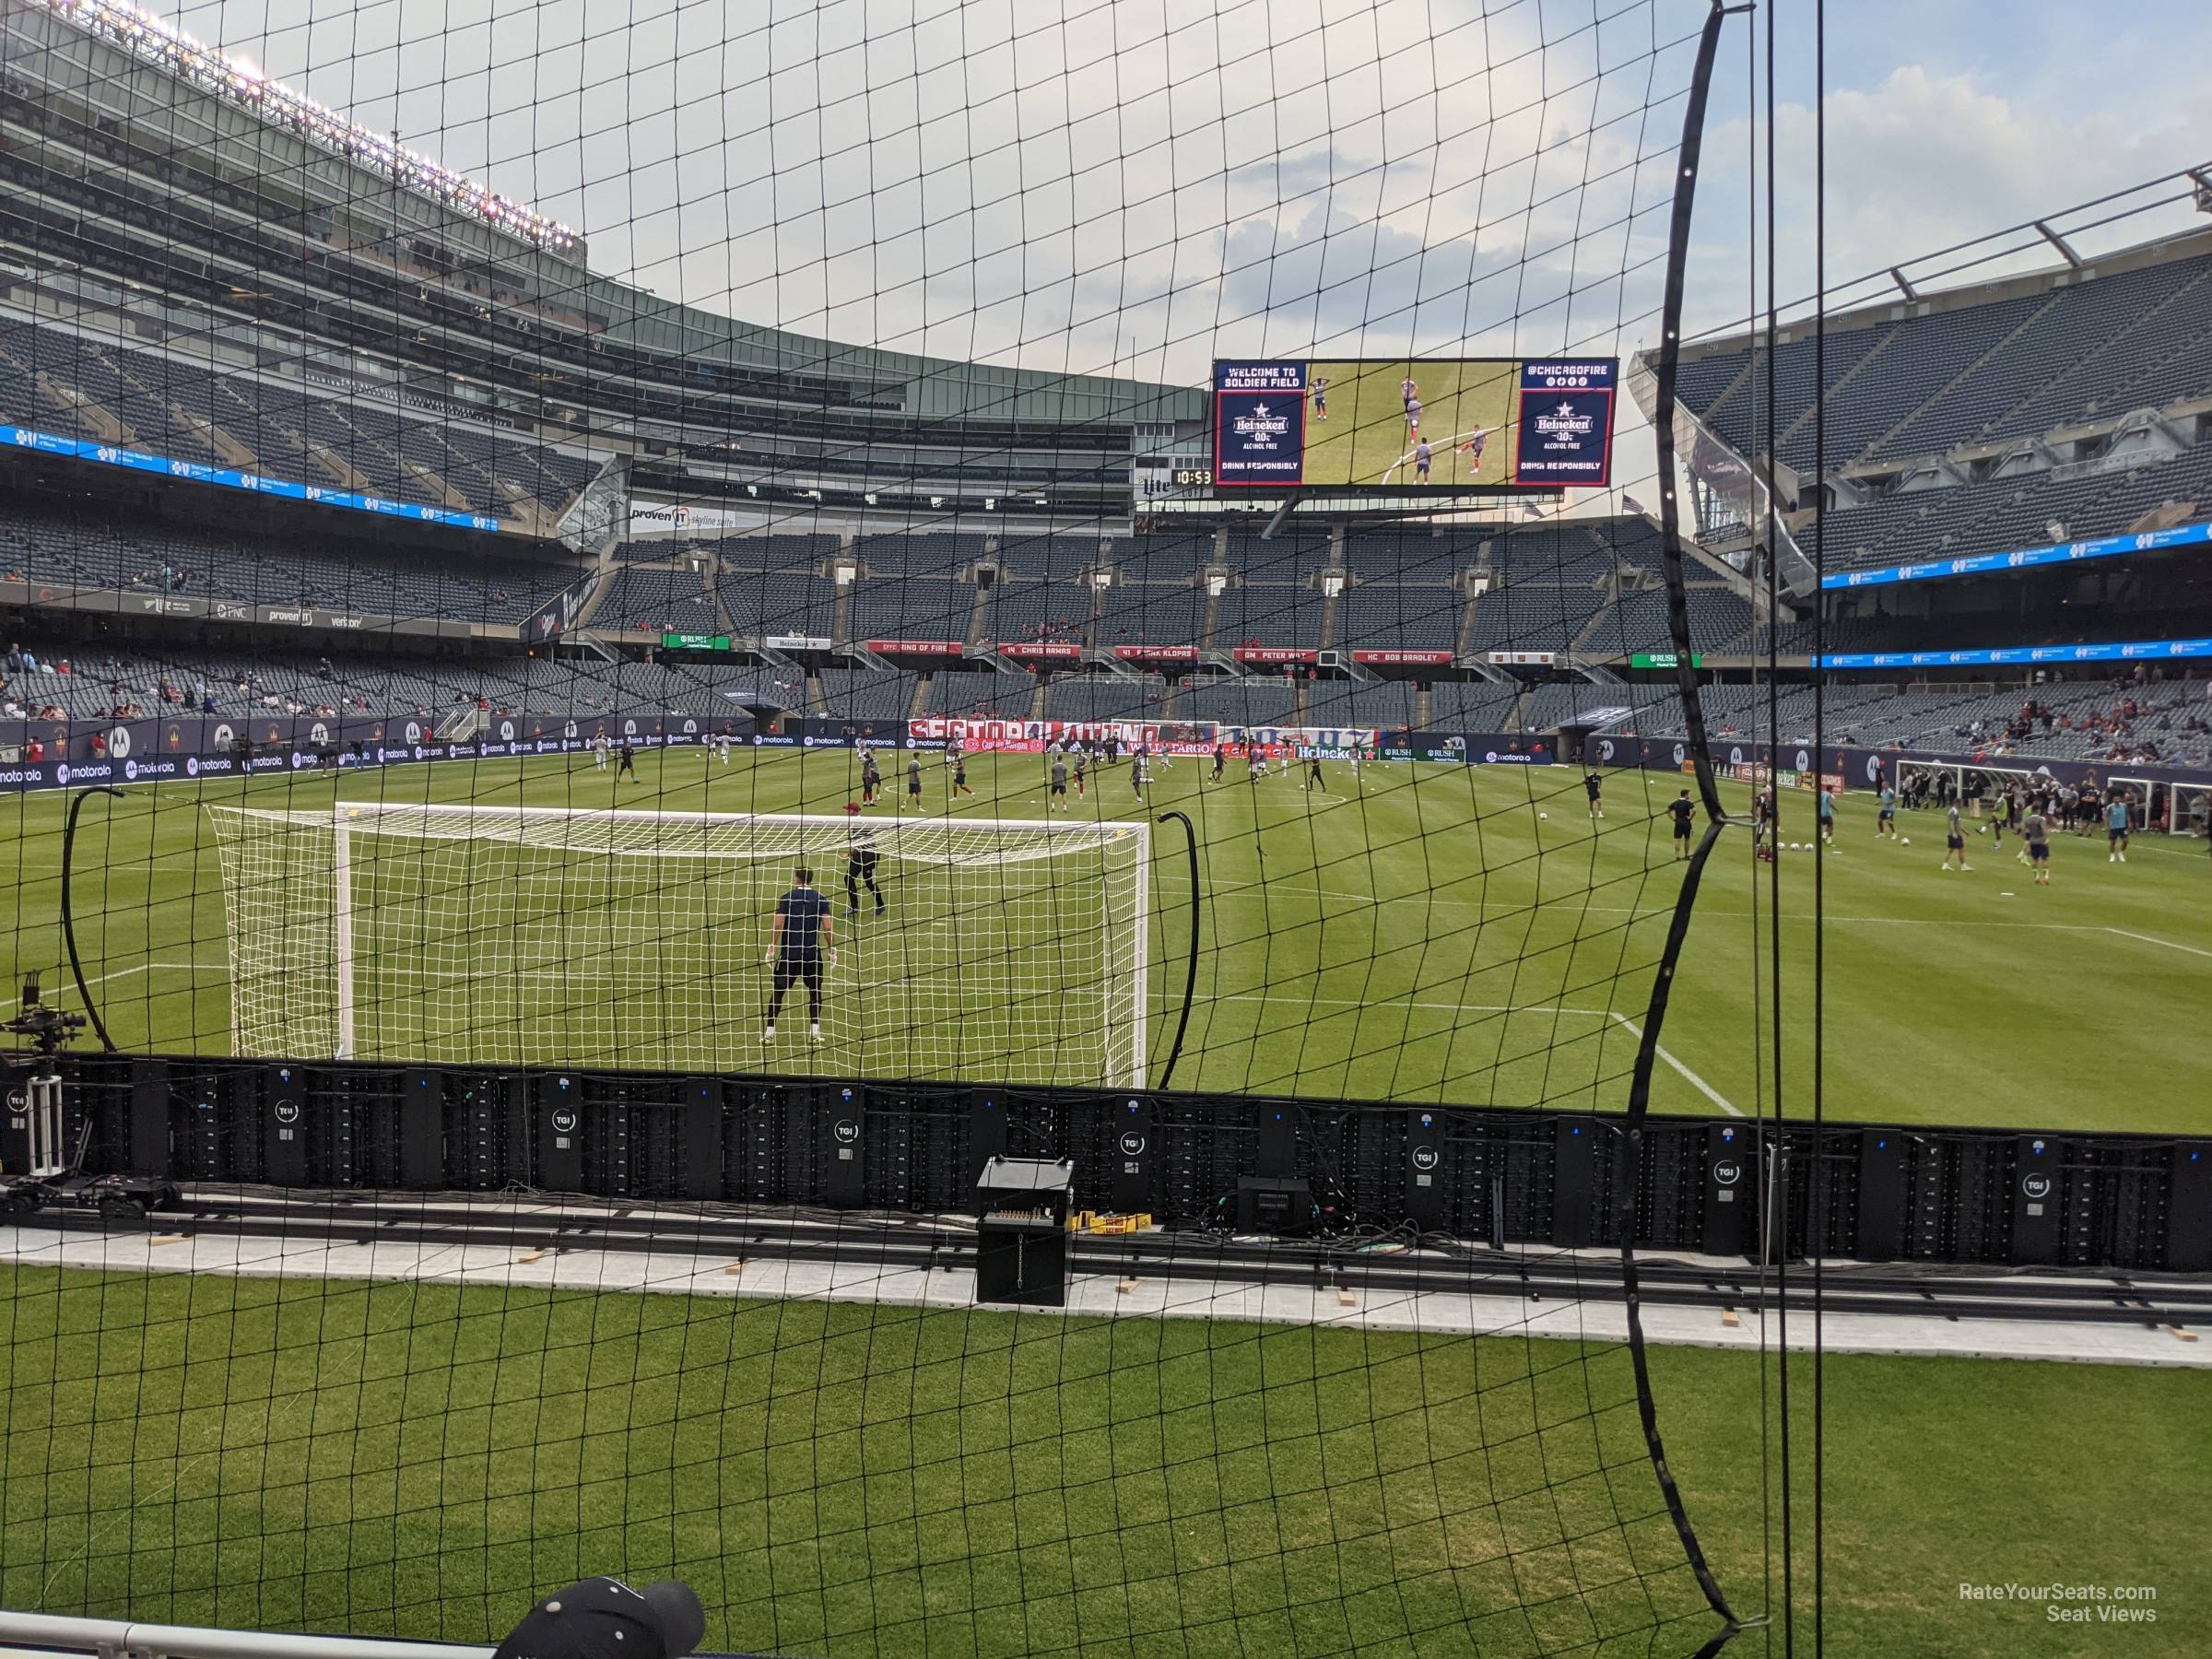 section 151, row 4 seat view  for soccer - soldier field